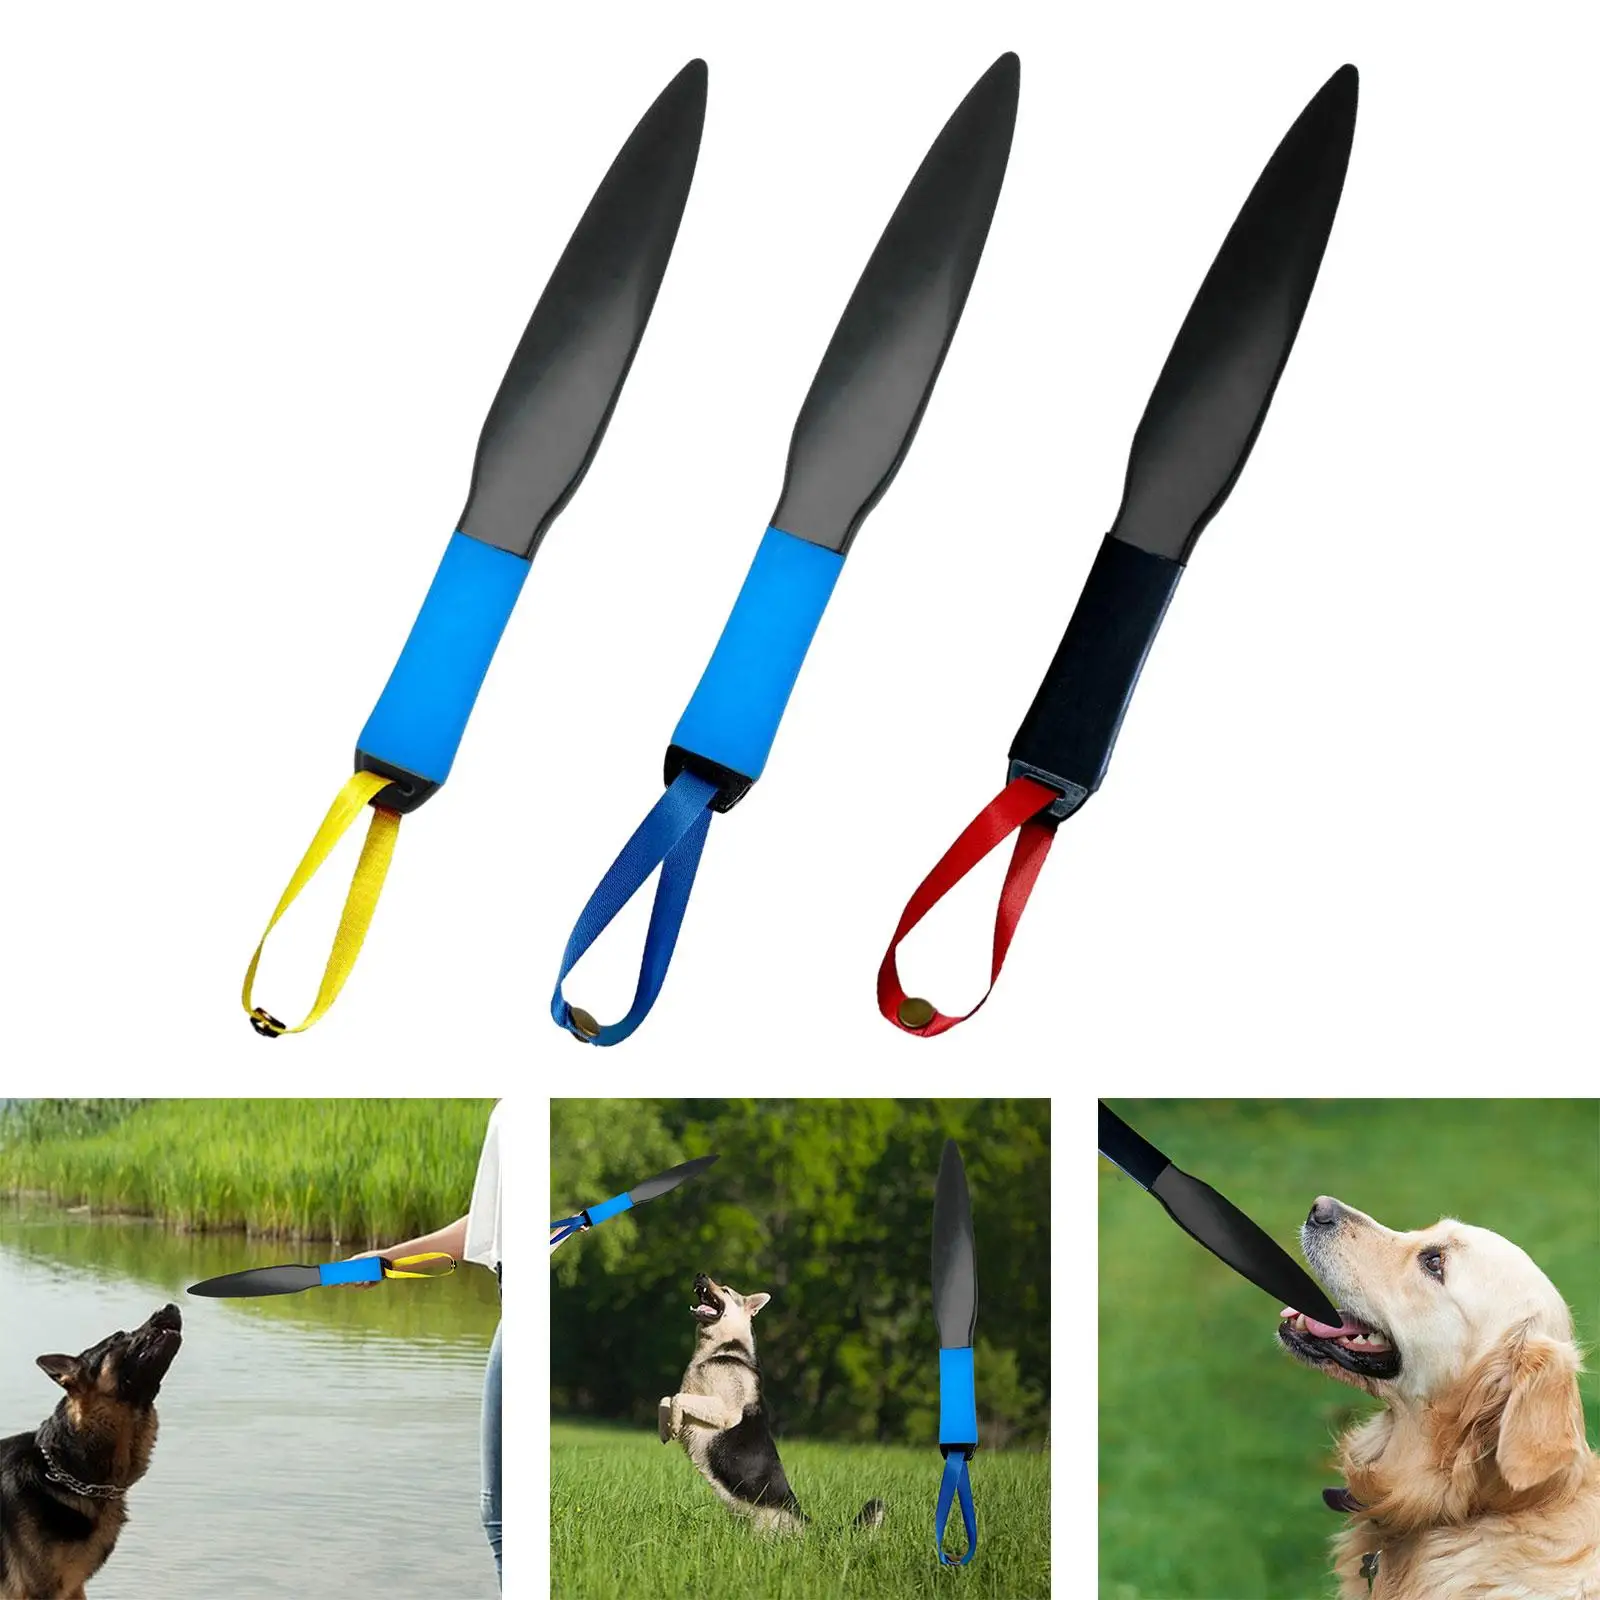 Dog Break Stick Nylon Protective Chewing Toy Durable Dog Bite Training Stick for Training Small Medium Dogs Pet Supplies